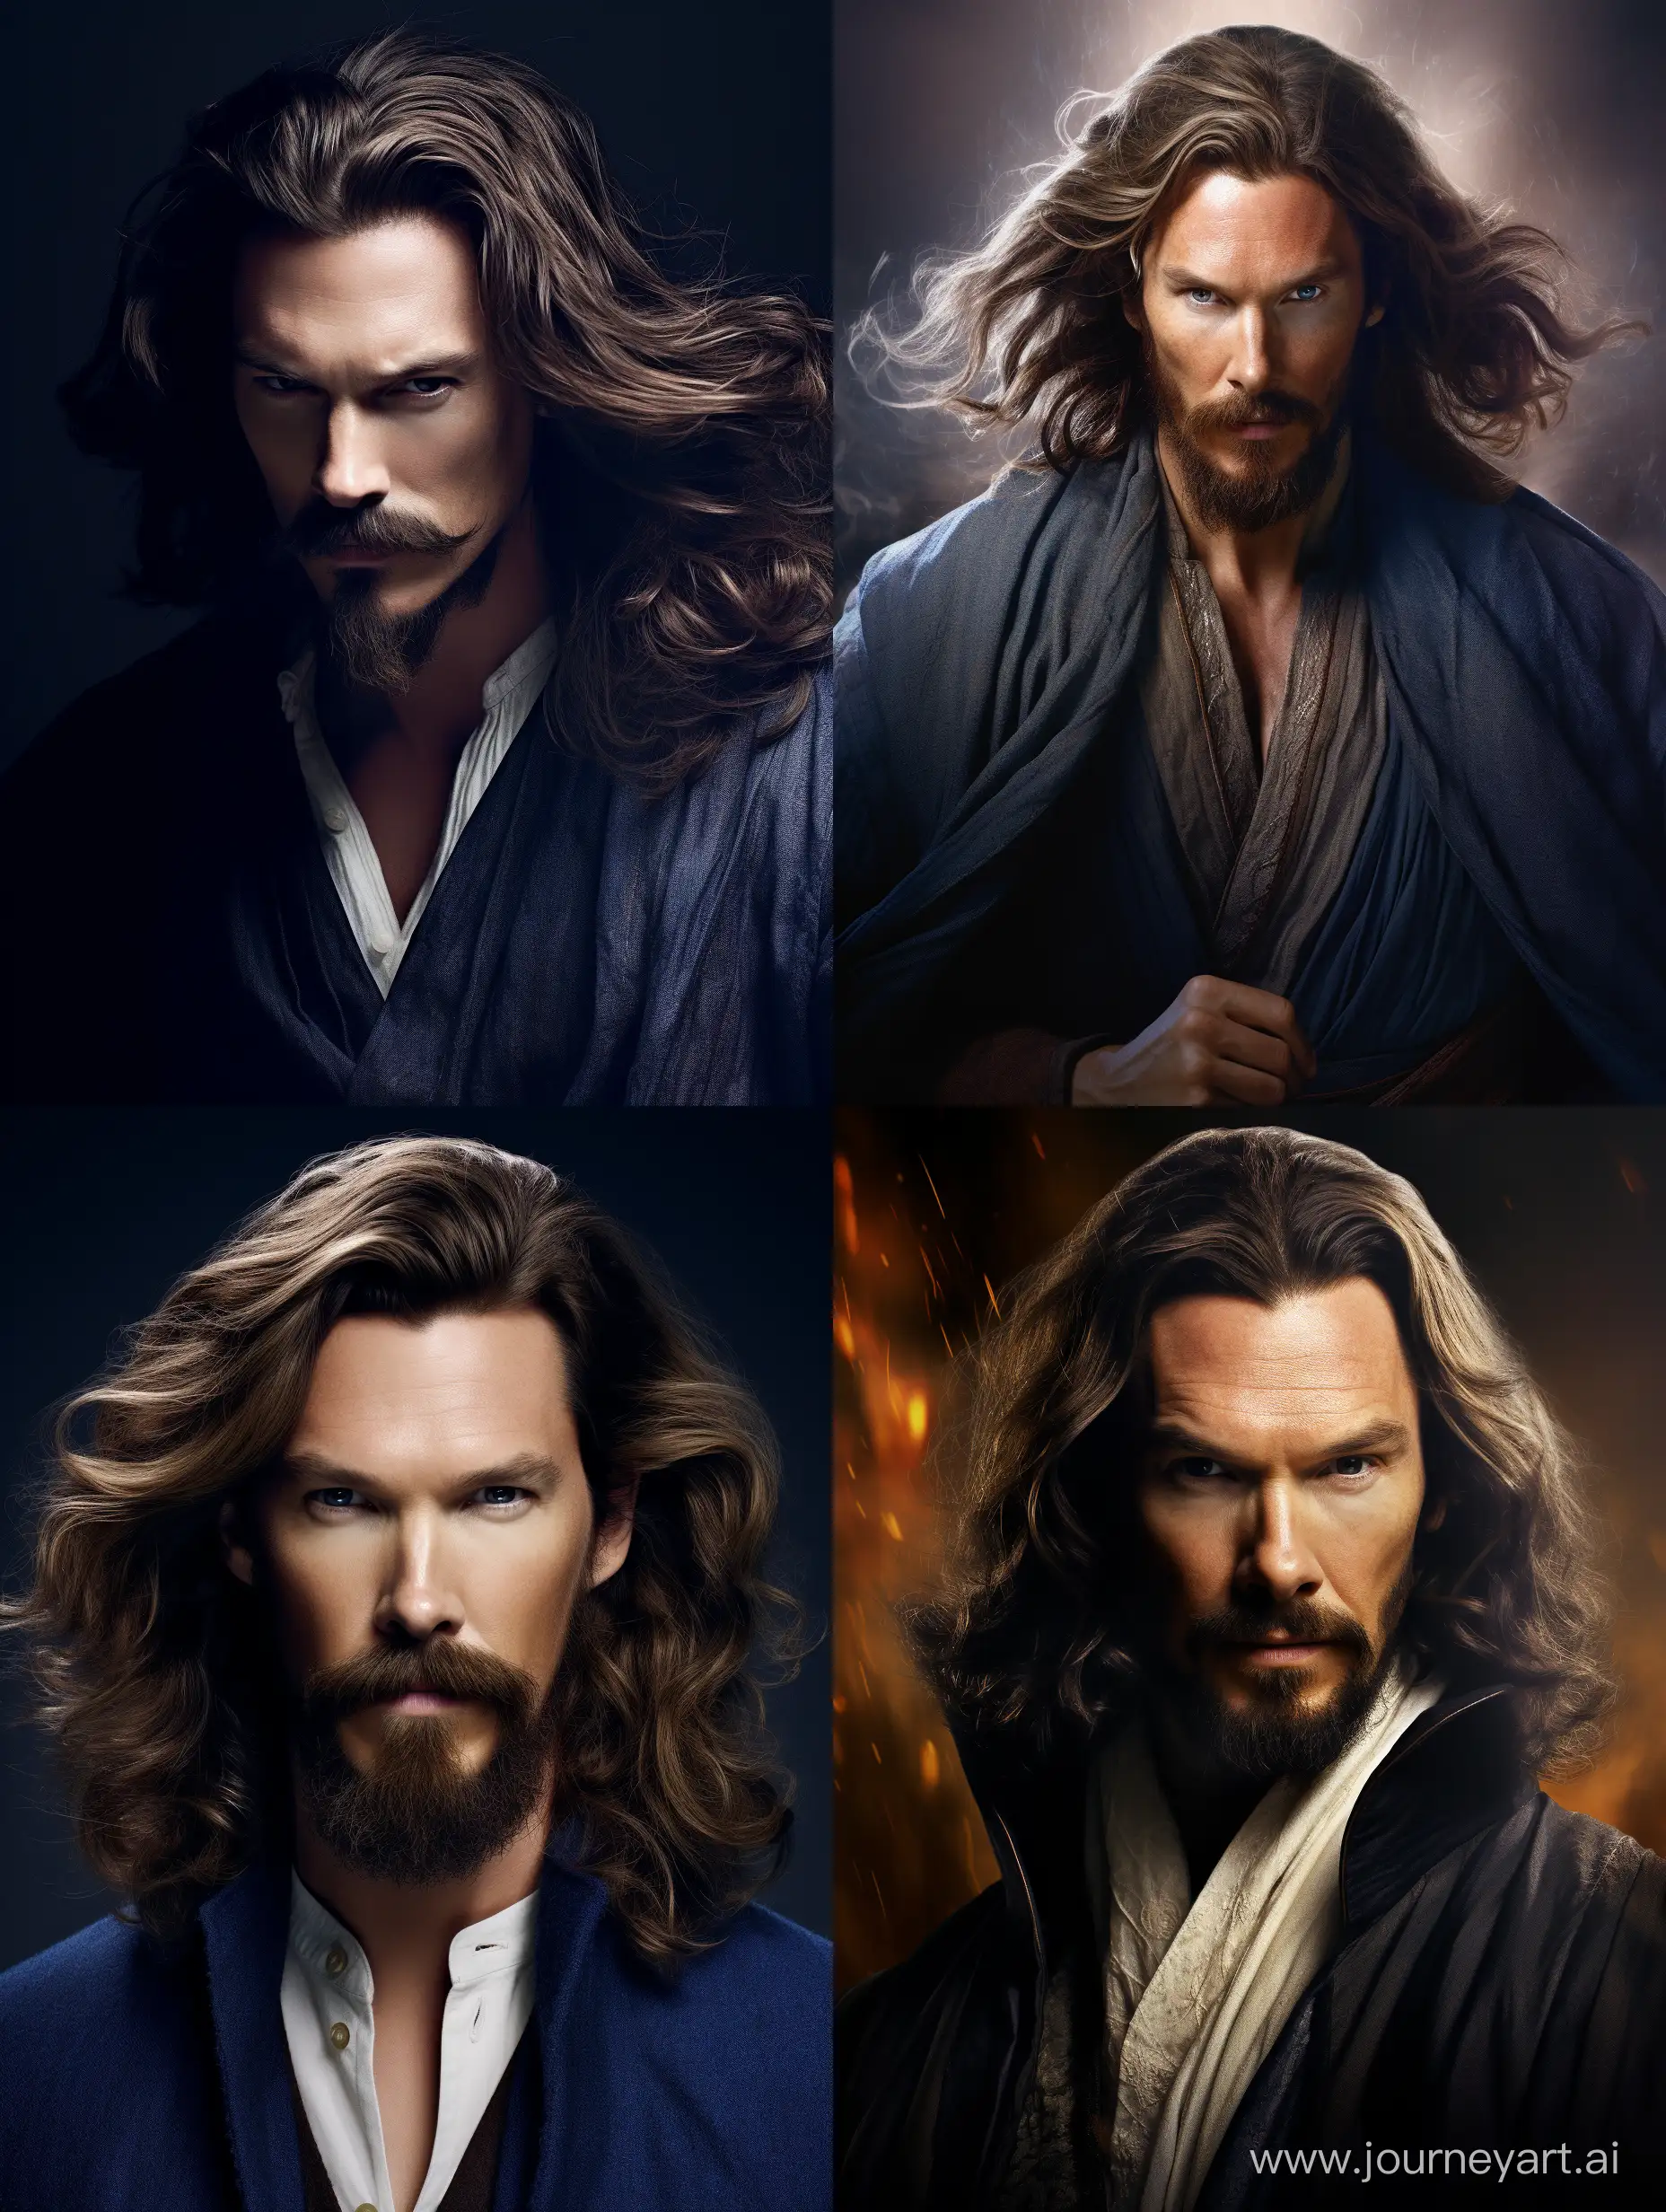 A realistic picture of Benedict Cumberbatch dressed as Doctor Strange, long wavy hair and goatee beard